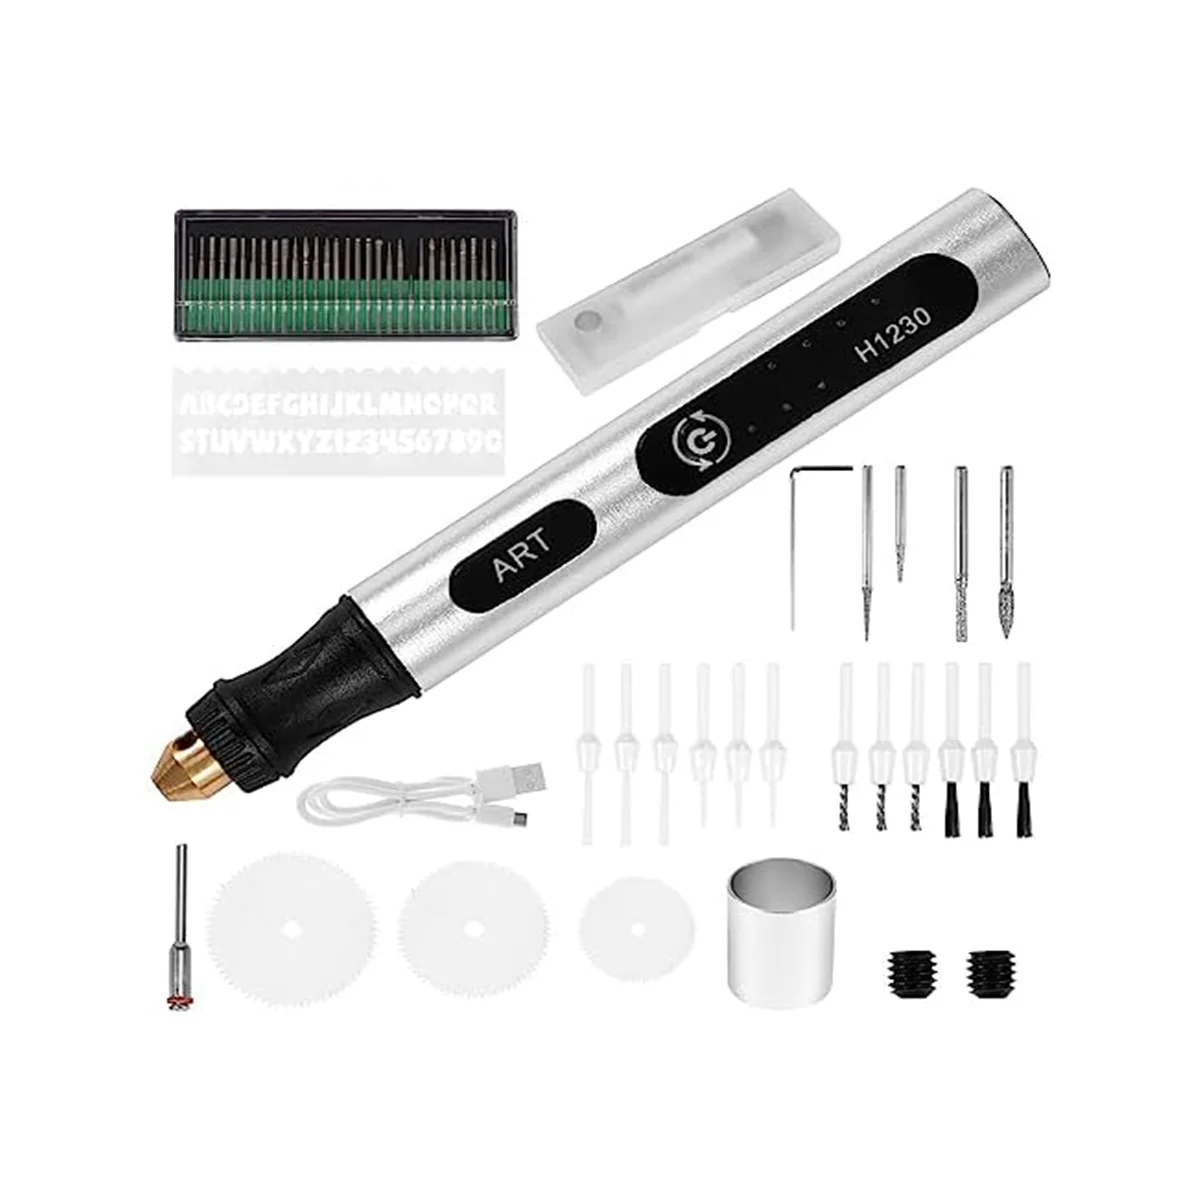 

Electric Engraving Pen Kit, USB Rechargeable Engraving Pen,For Metal Ceramic Wood Plastic Jewelry Glass Pebbles Carving